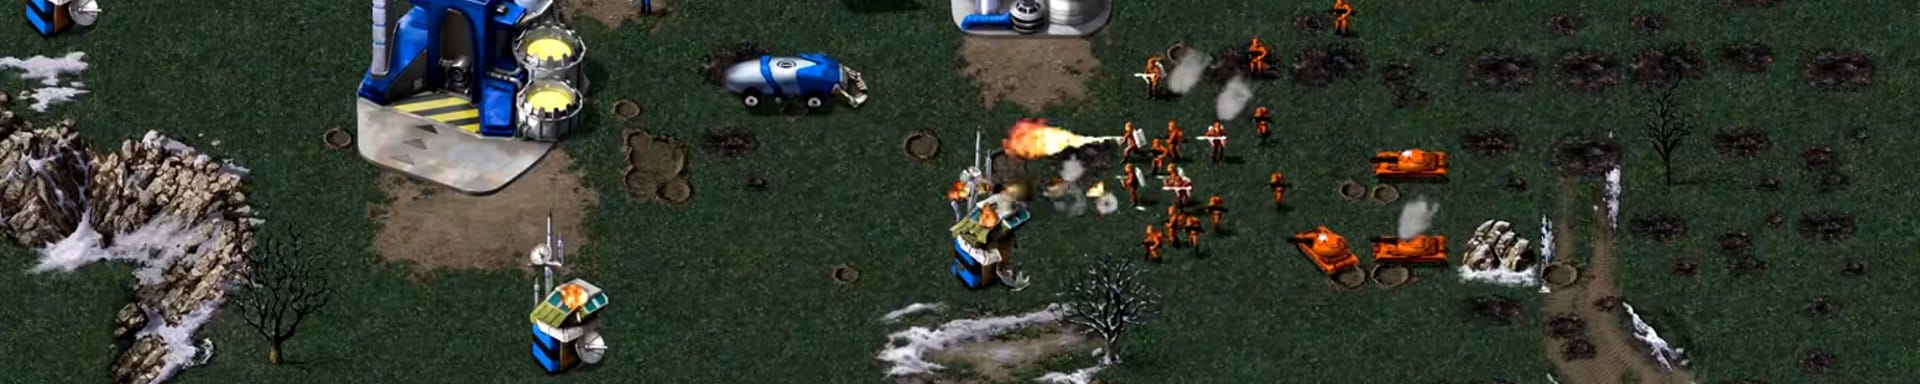 Command and Conquer Remastered mods open source slice